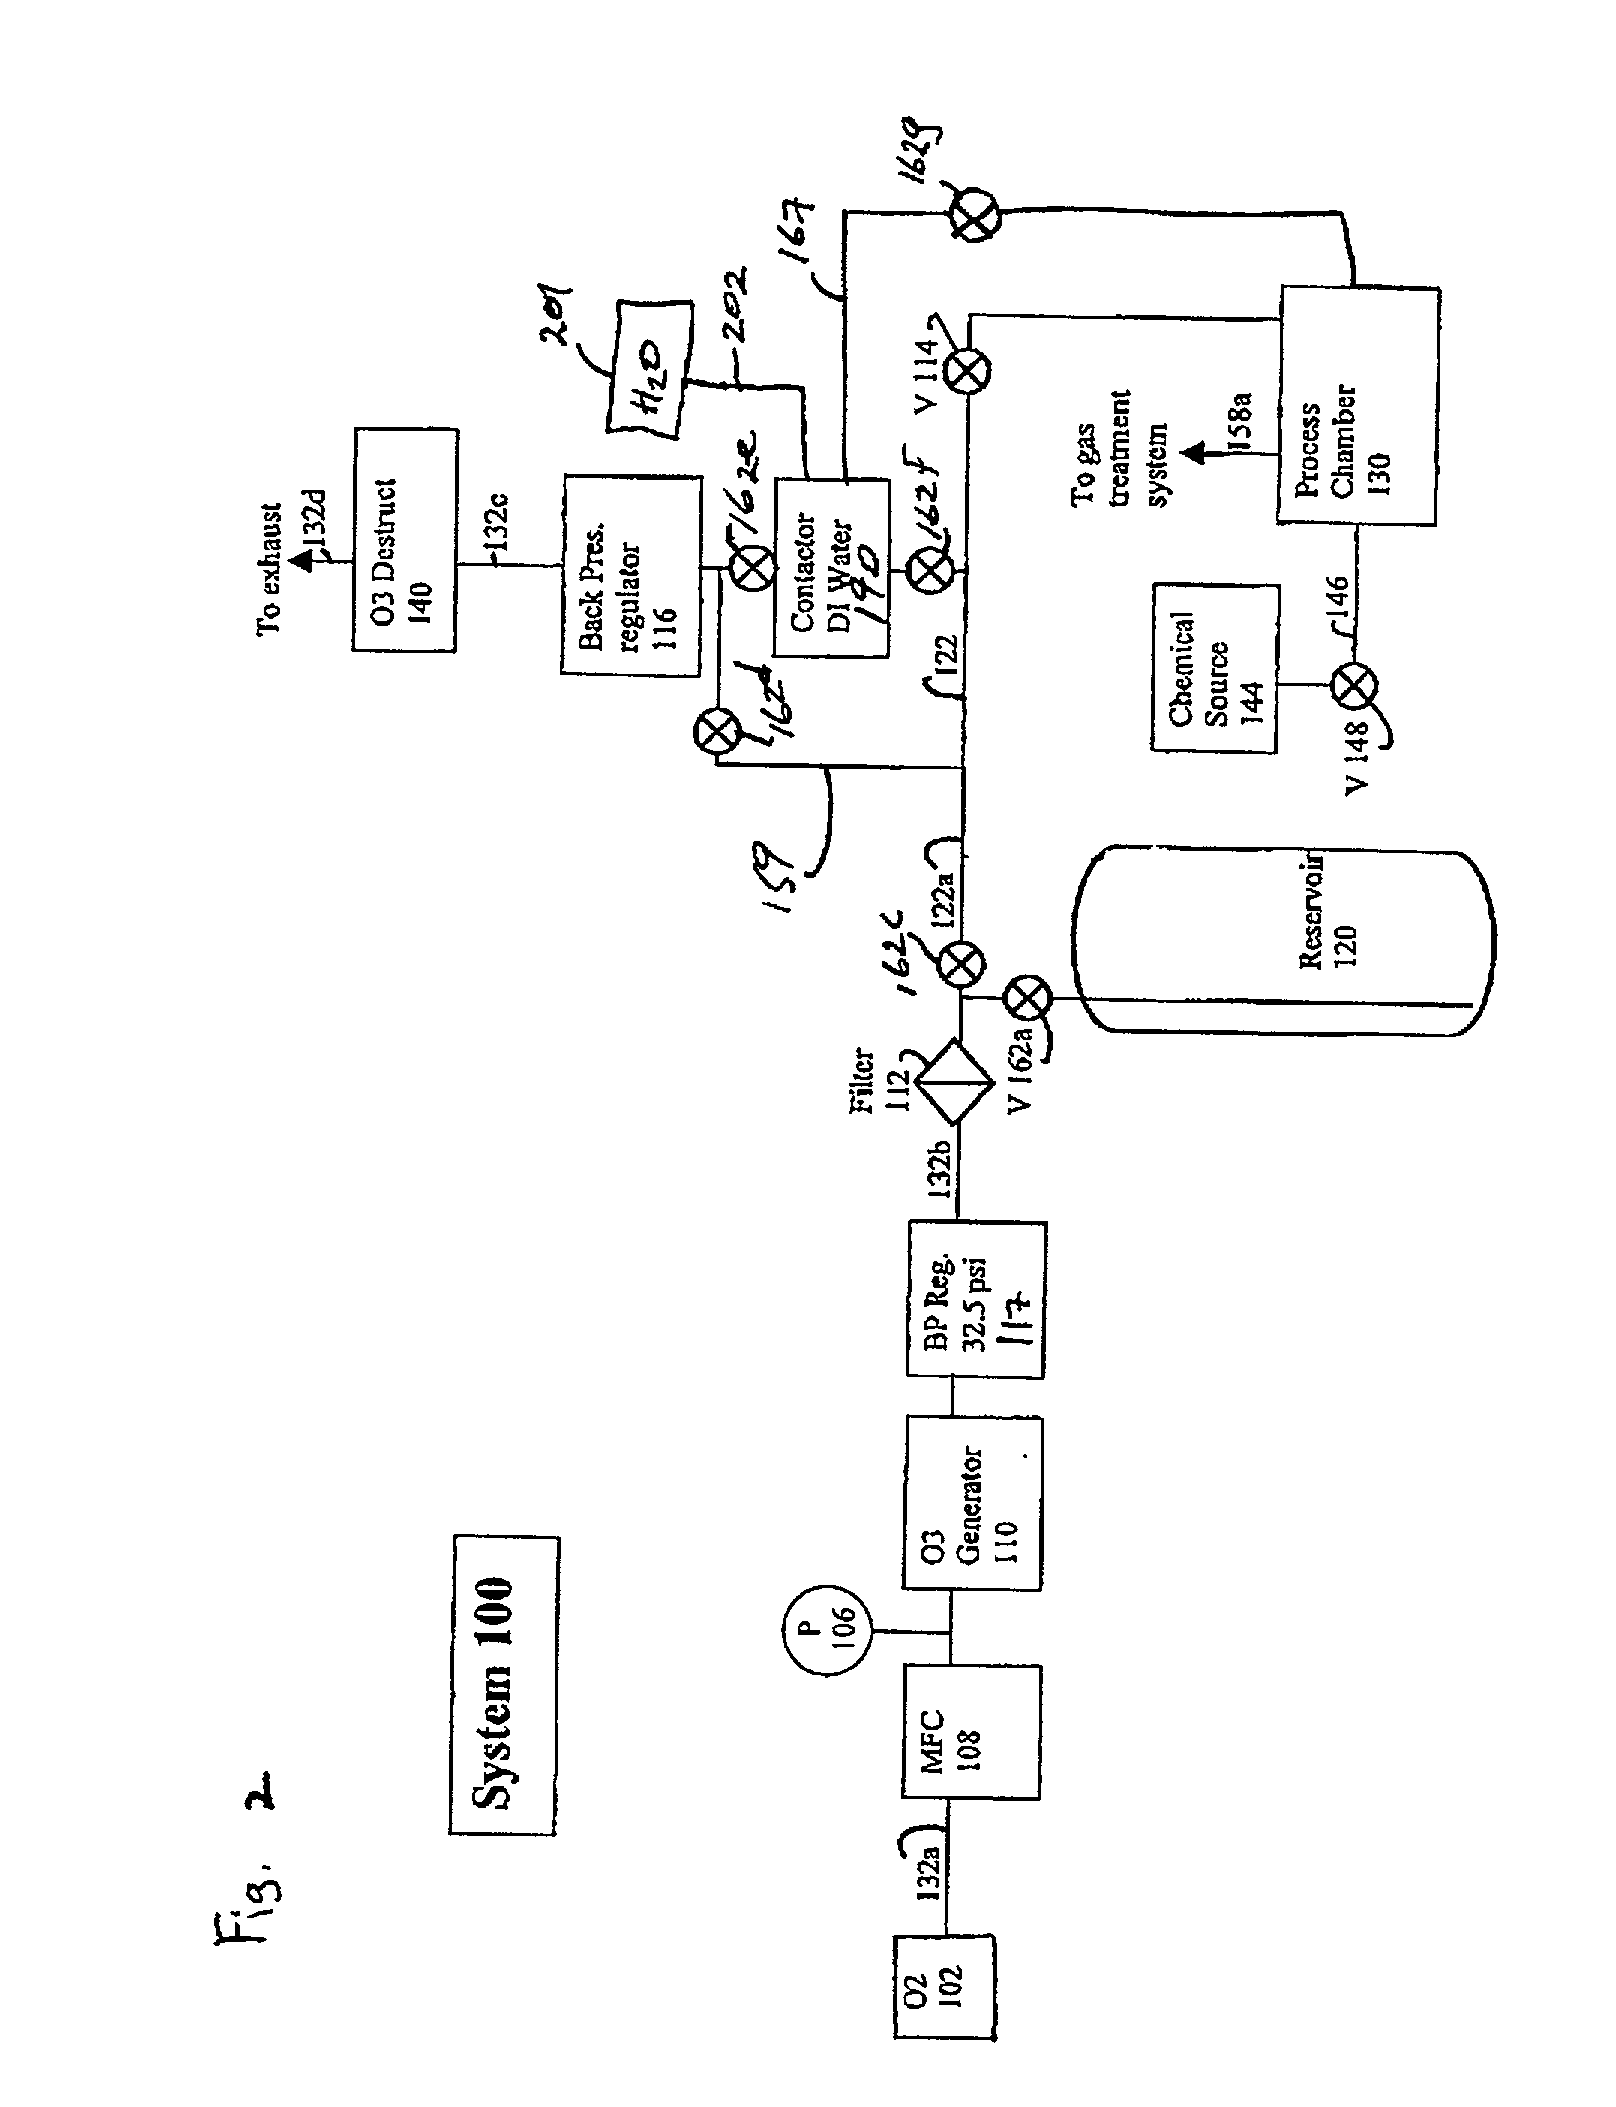 Method and apparatus to quickly increase the concentration of gas in a process chamber to a very high level